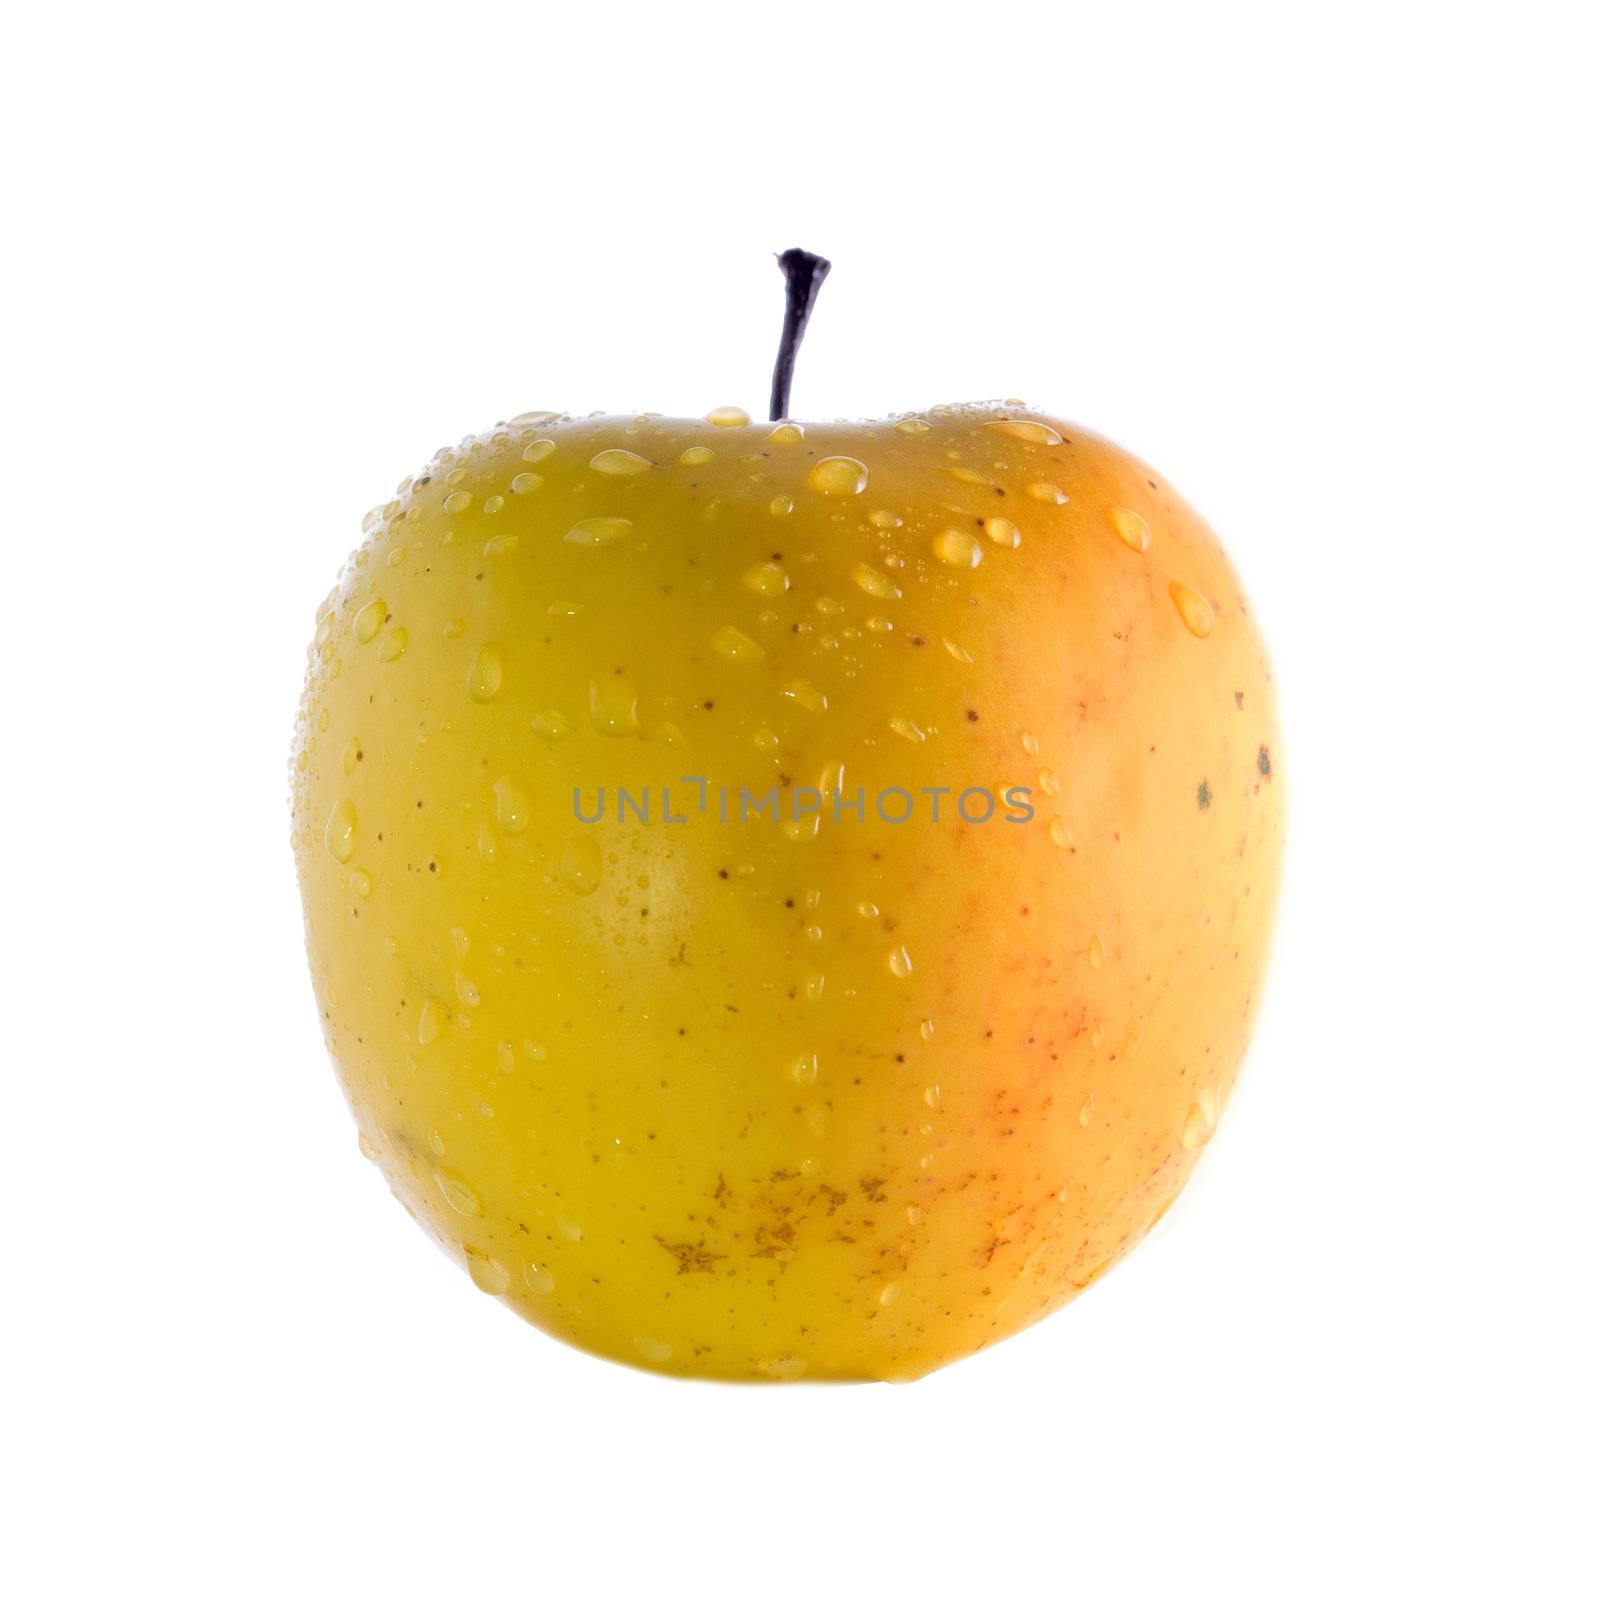 Stock photo: an image of a big yellow apple with drops of water on it